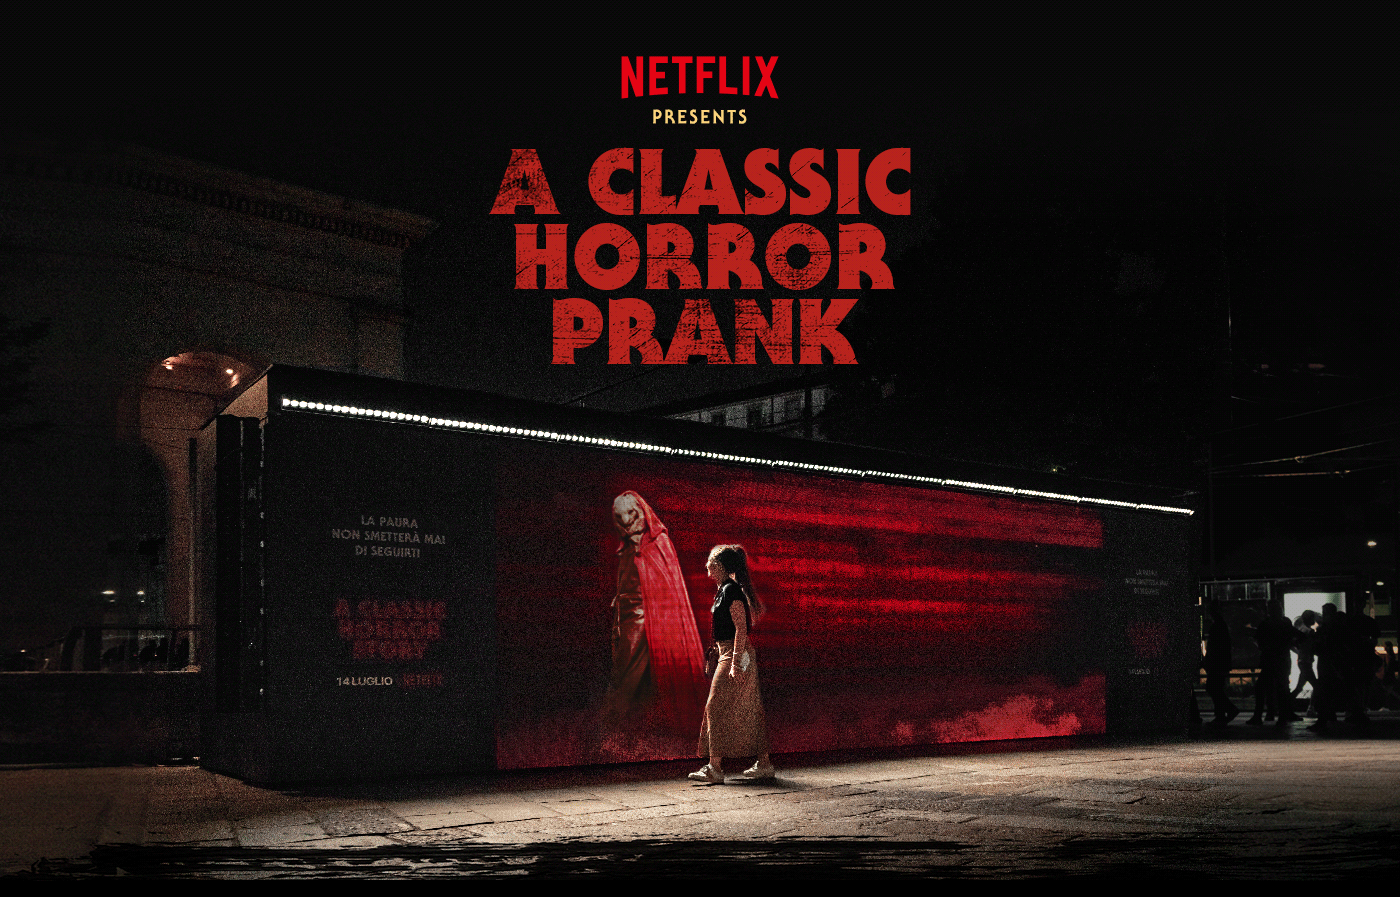 a classic horror story activation Advertising  art direction  billboard horror Netflix Prank Scary milan